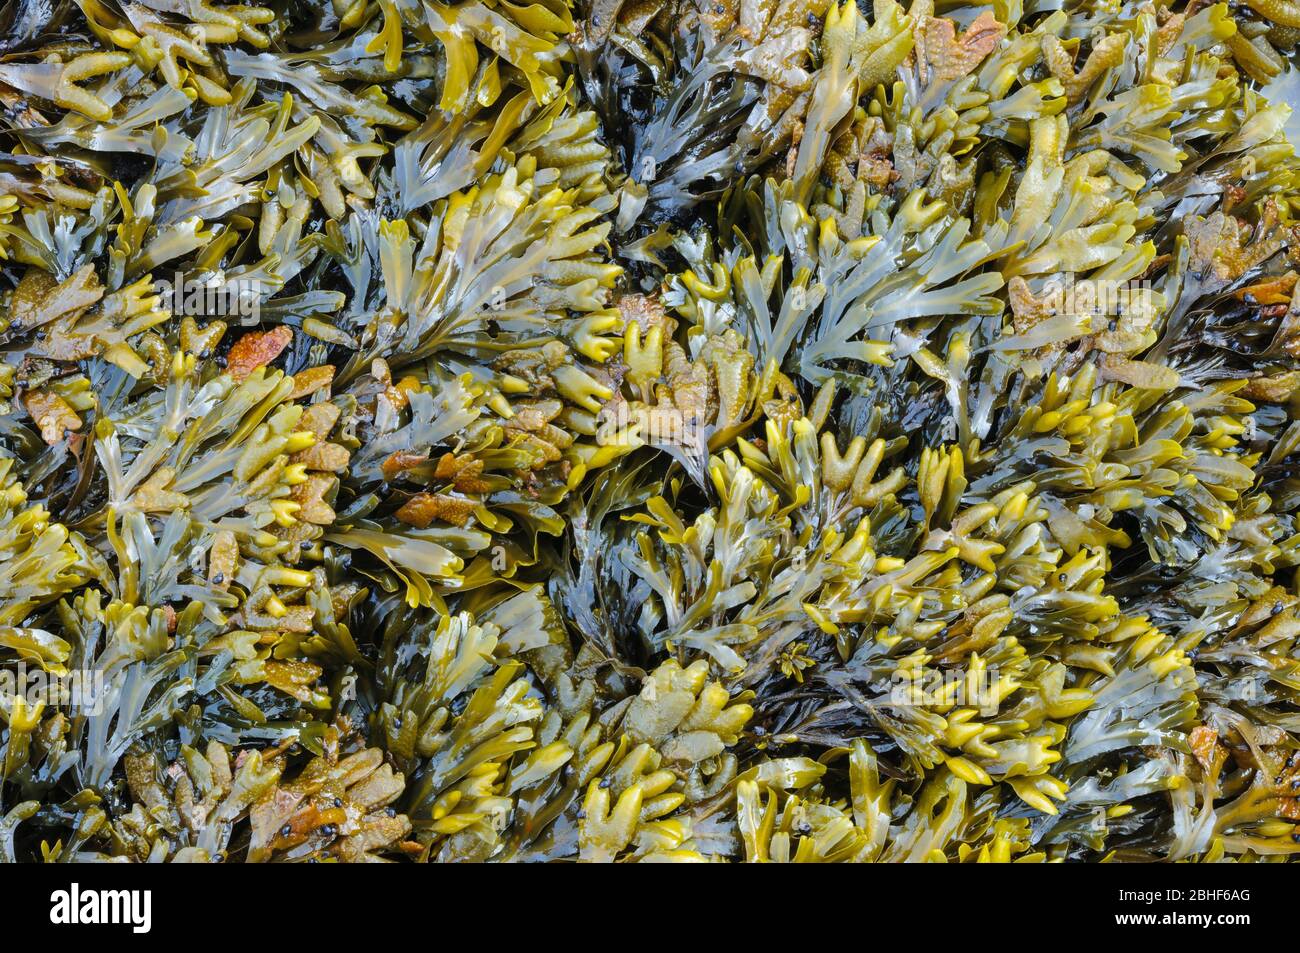 Rockweed (Fucus distichus), a common seaweed in the intertidal zone on the Pacific Northwest coast; Rialto Beach, Olympic National Park, Washington. Stock Photo